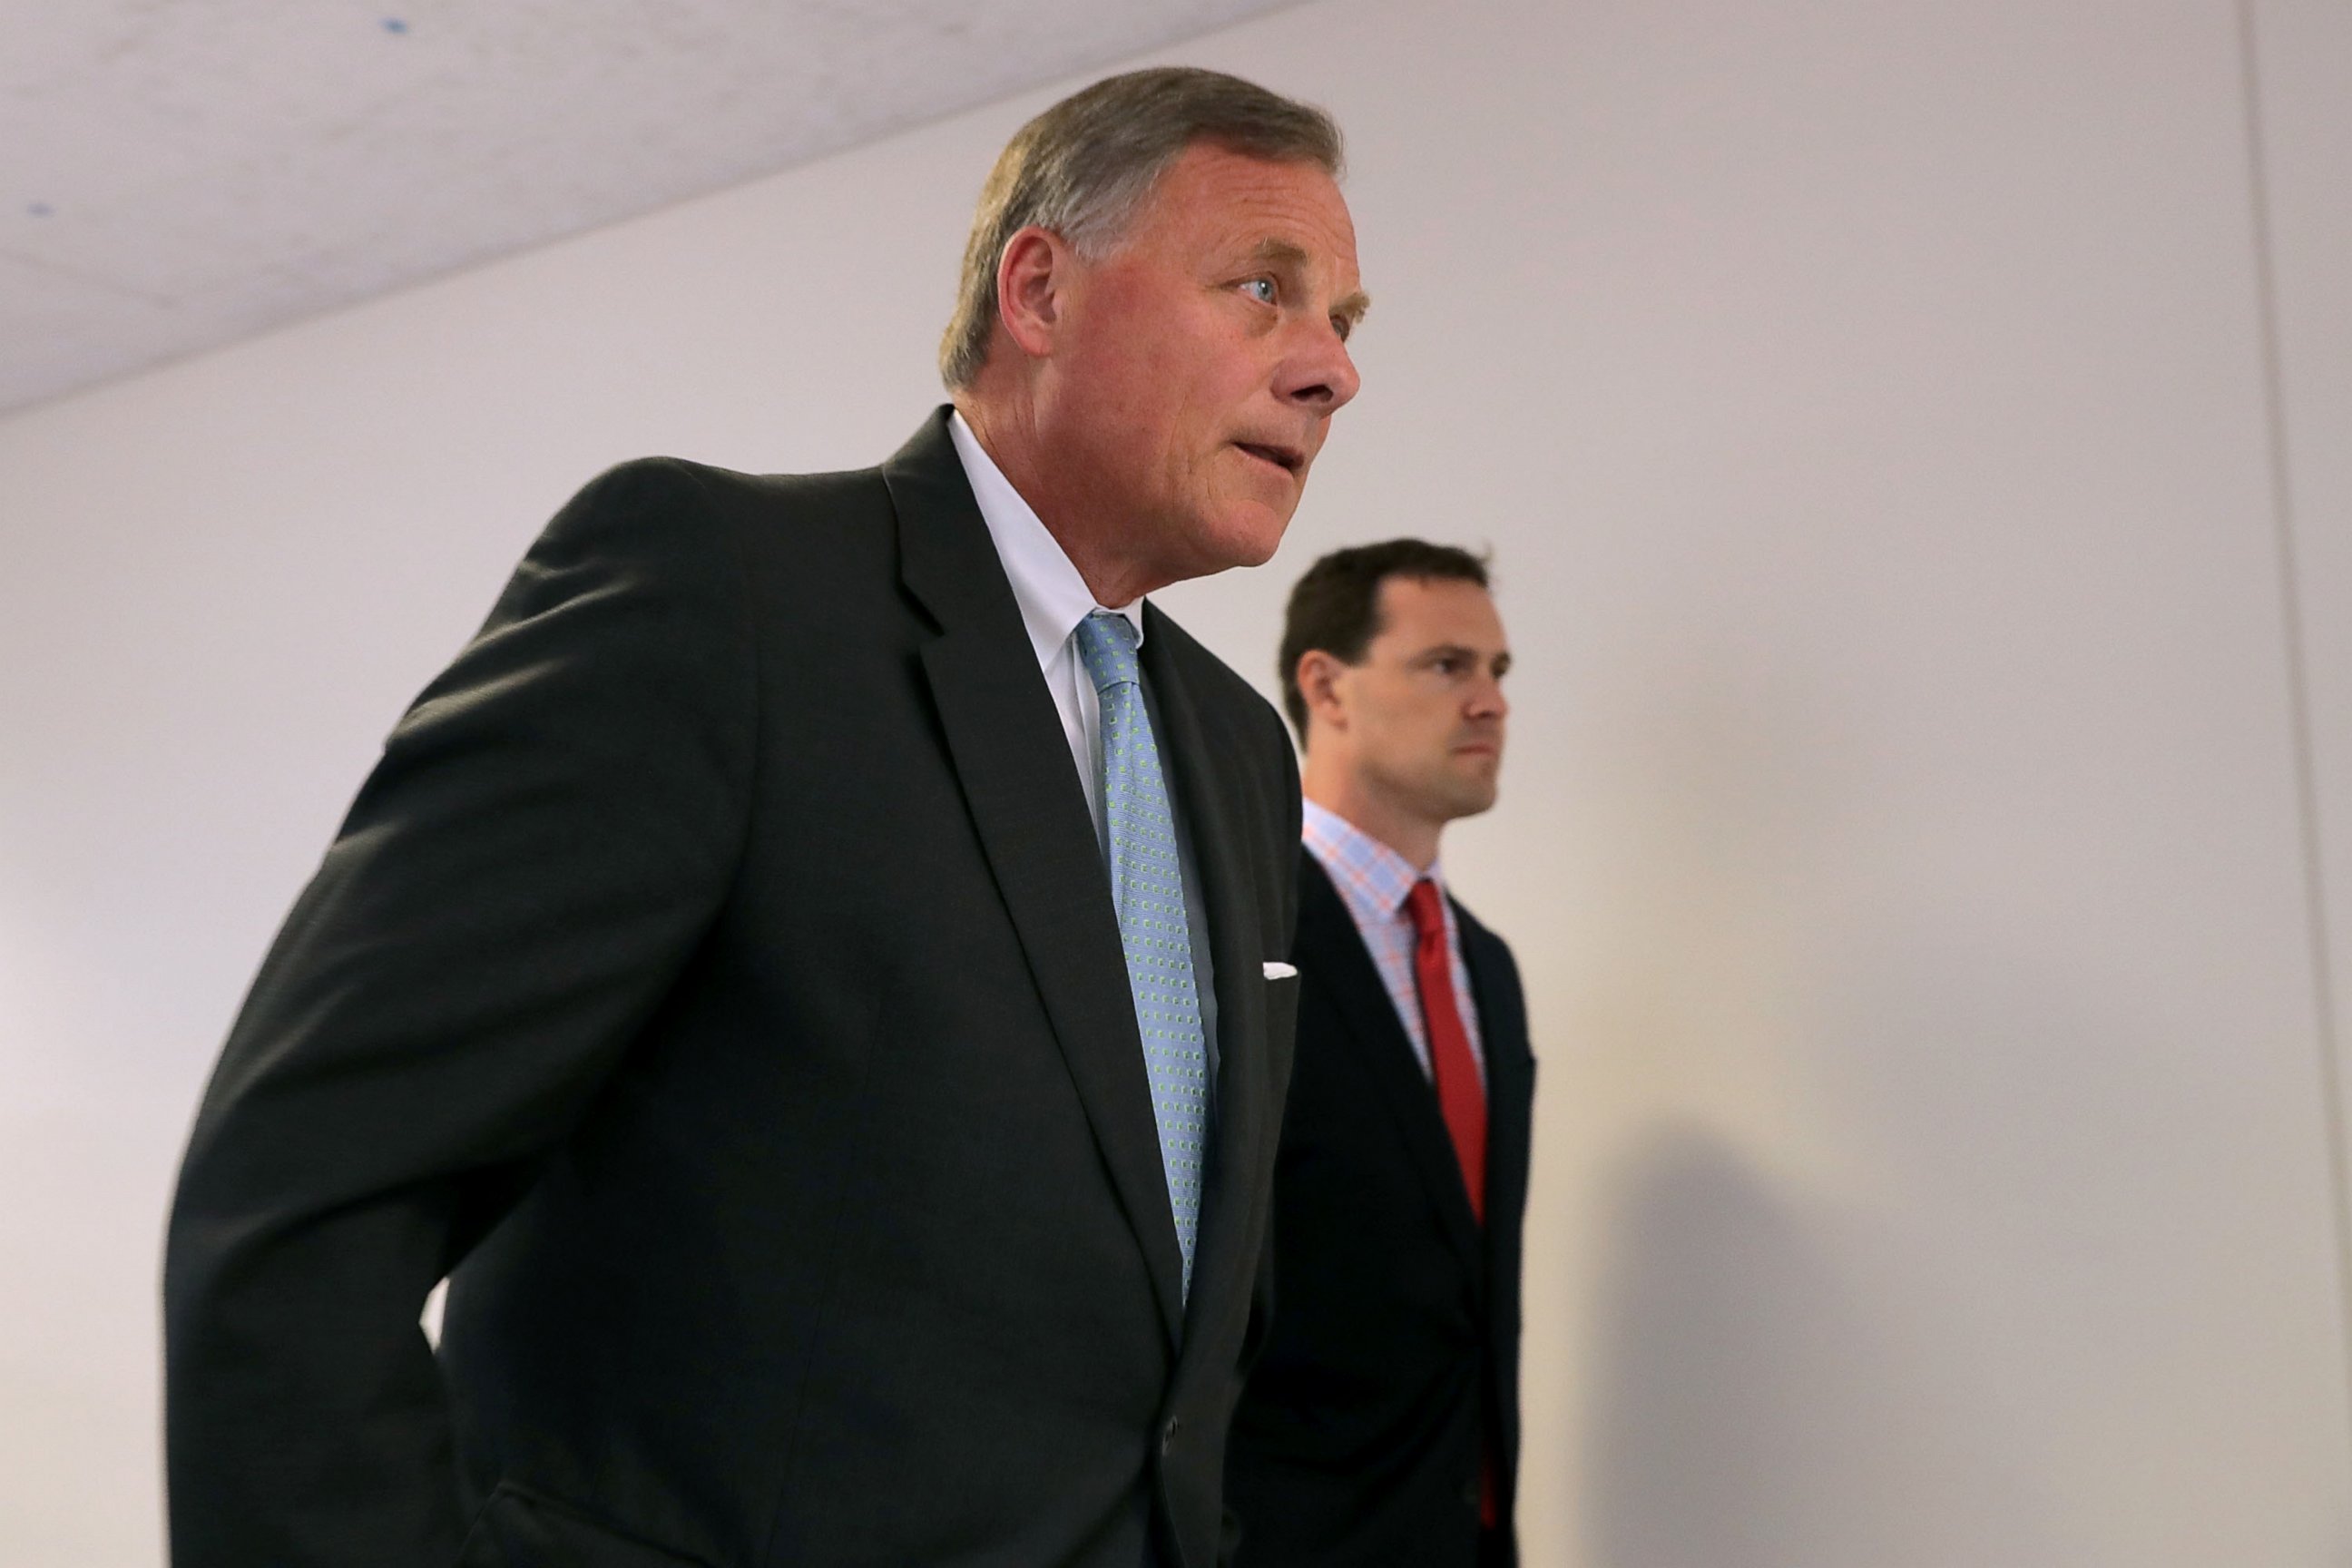 PHOTO: Senate Intelligence Committee Chairman Richard Burr arrives for a closed-door committee meeting in the Hart Senate Office Building on Capitol Hill, June 6, 2017 in Washington, DC.